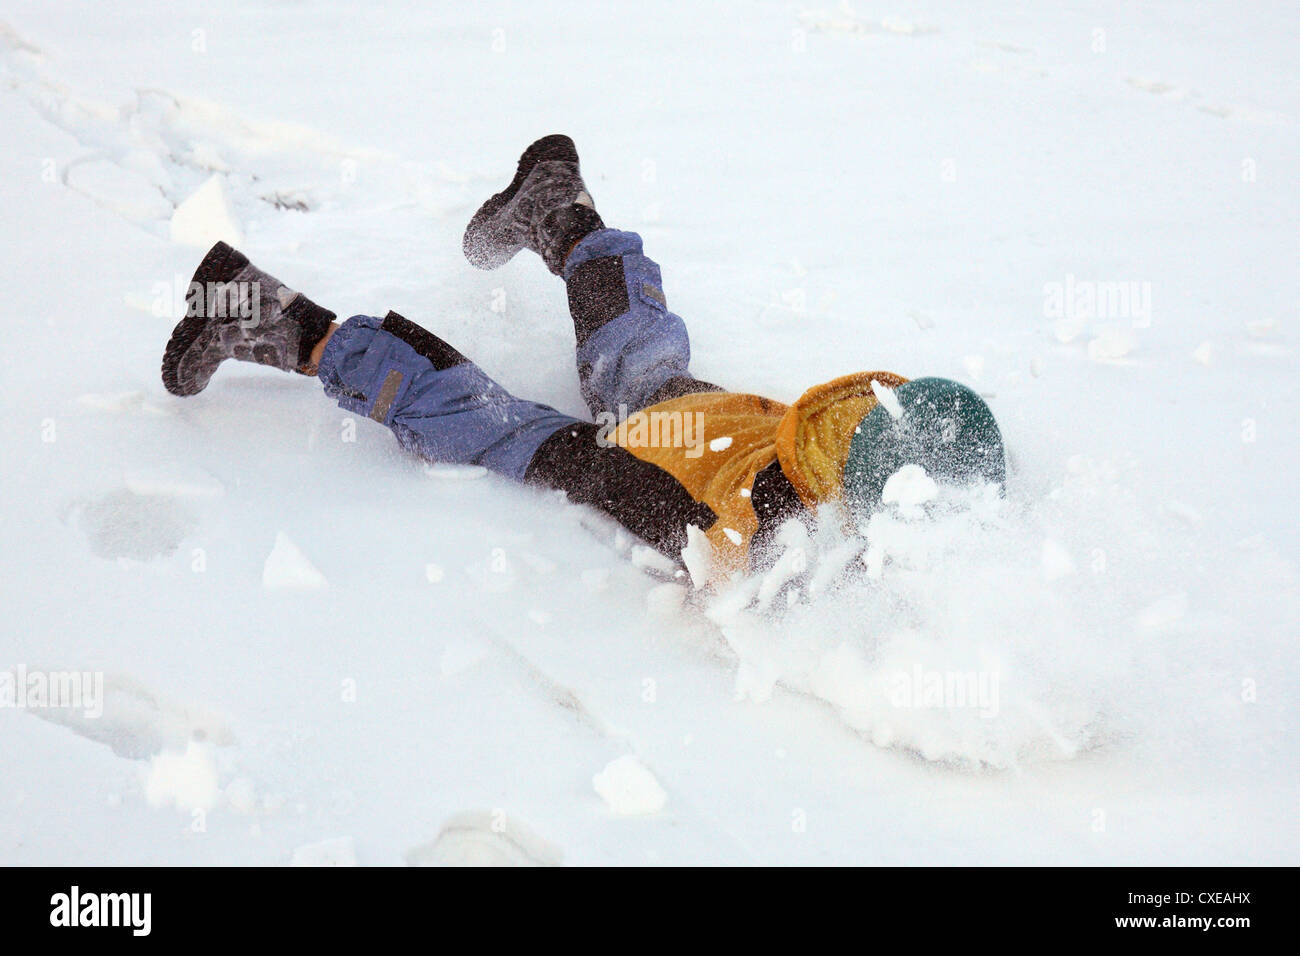 Tyrol, a child is raging in the snow Stock Photo